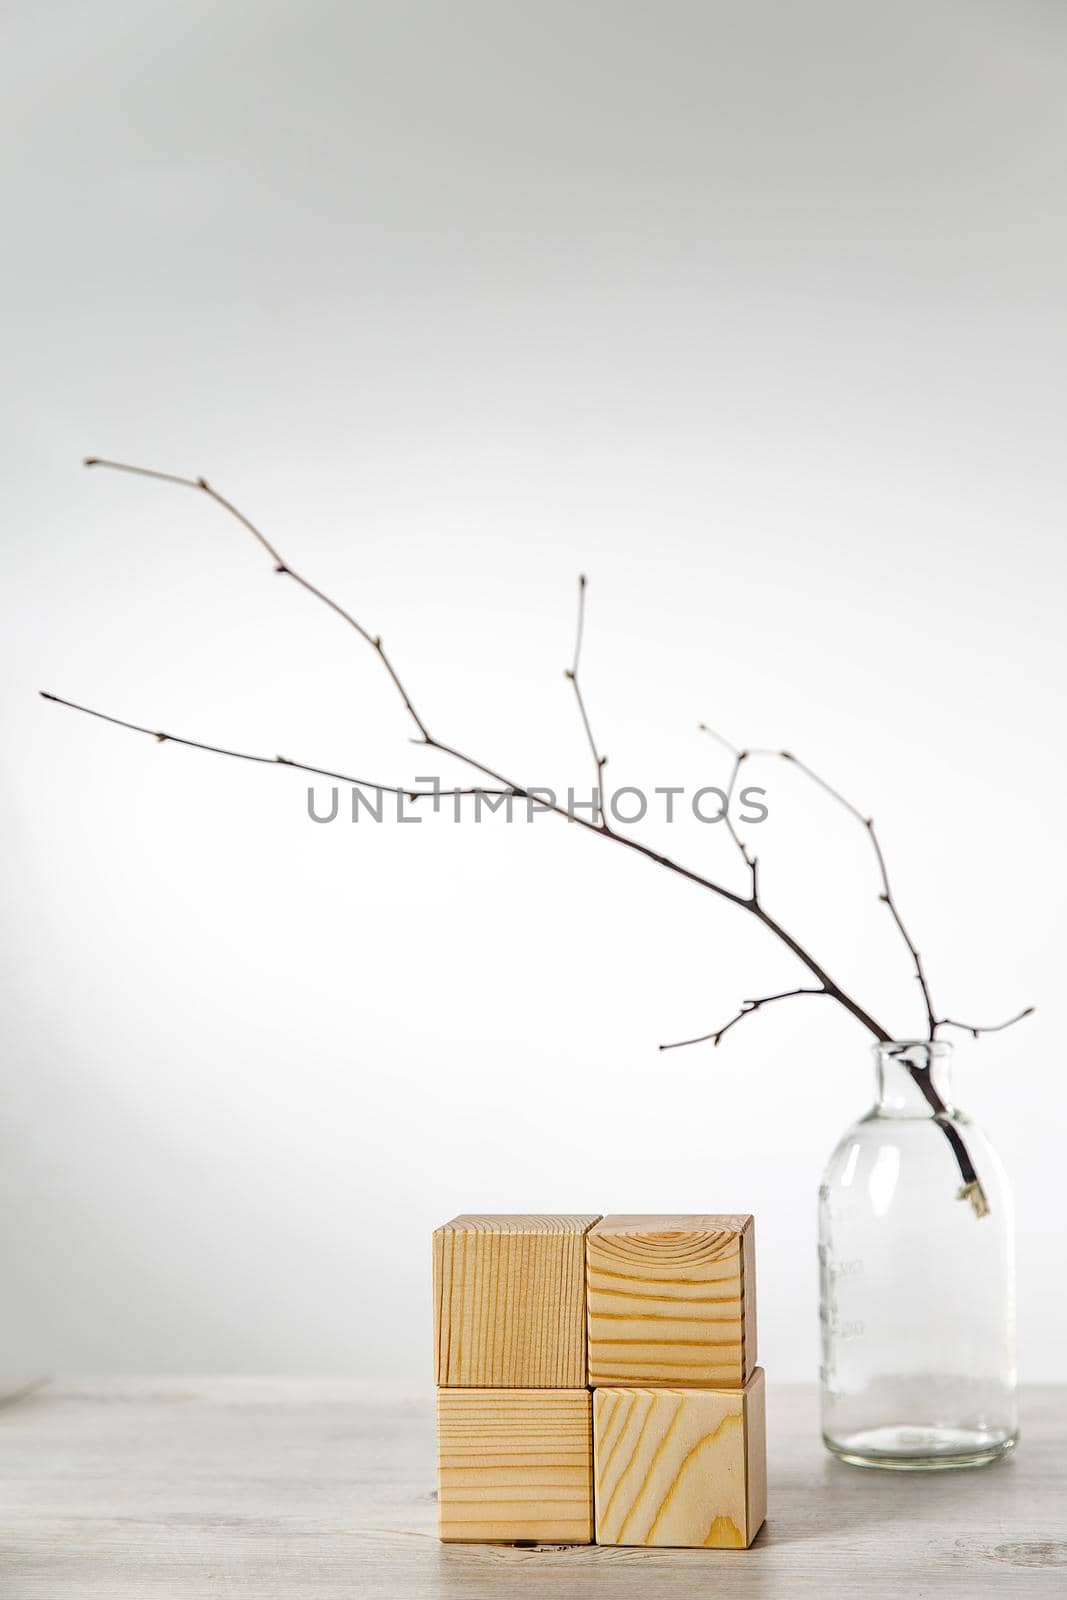 An unblown linden branch in a glass vase and four wooden cubes with space for text. Scandinavian style. Copy text by elenarostunova